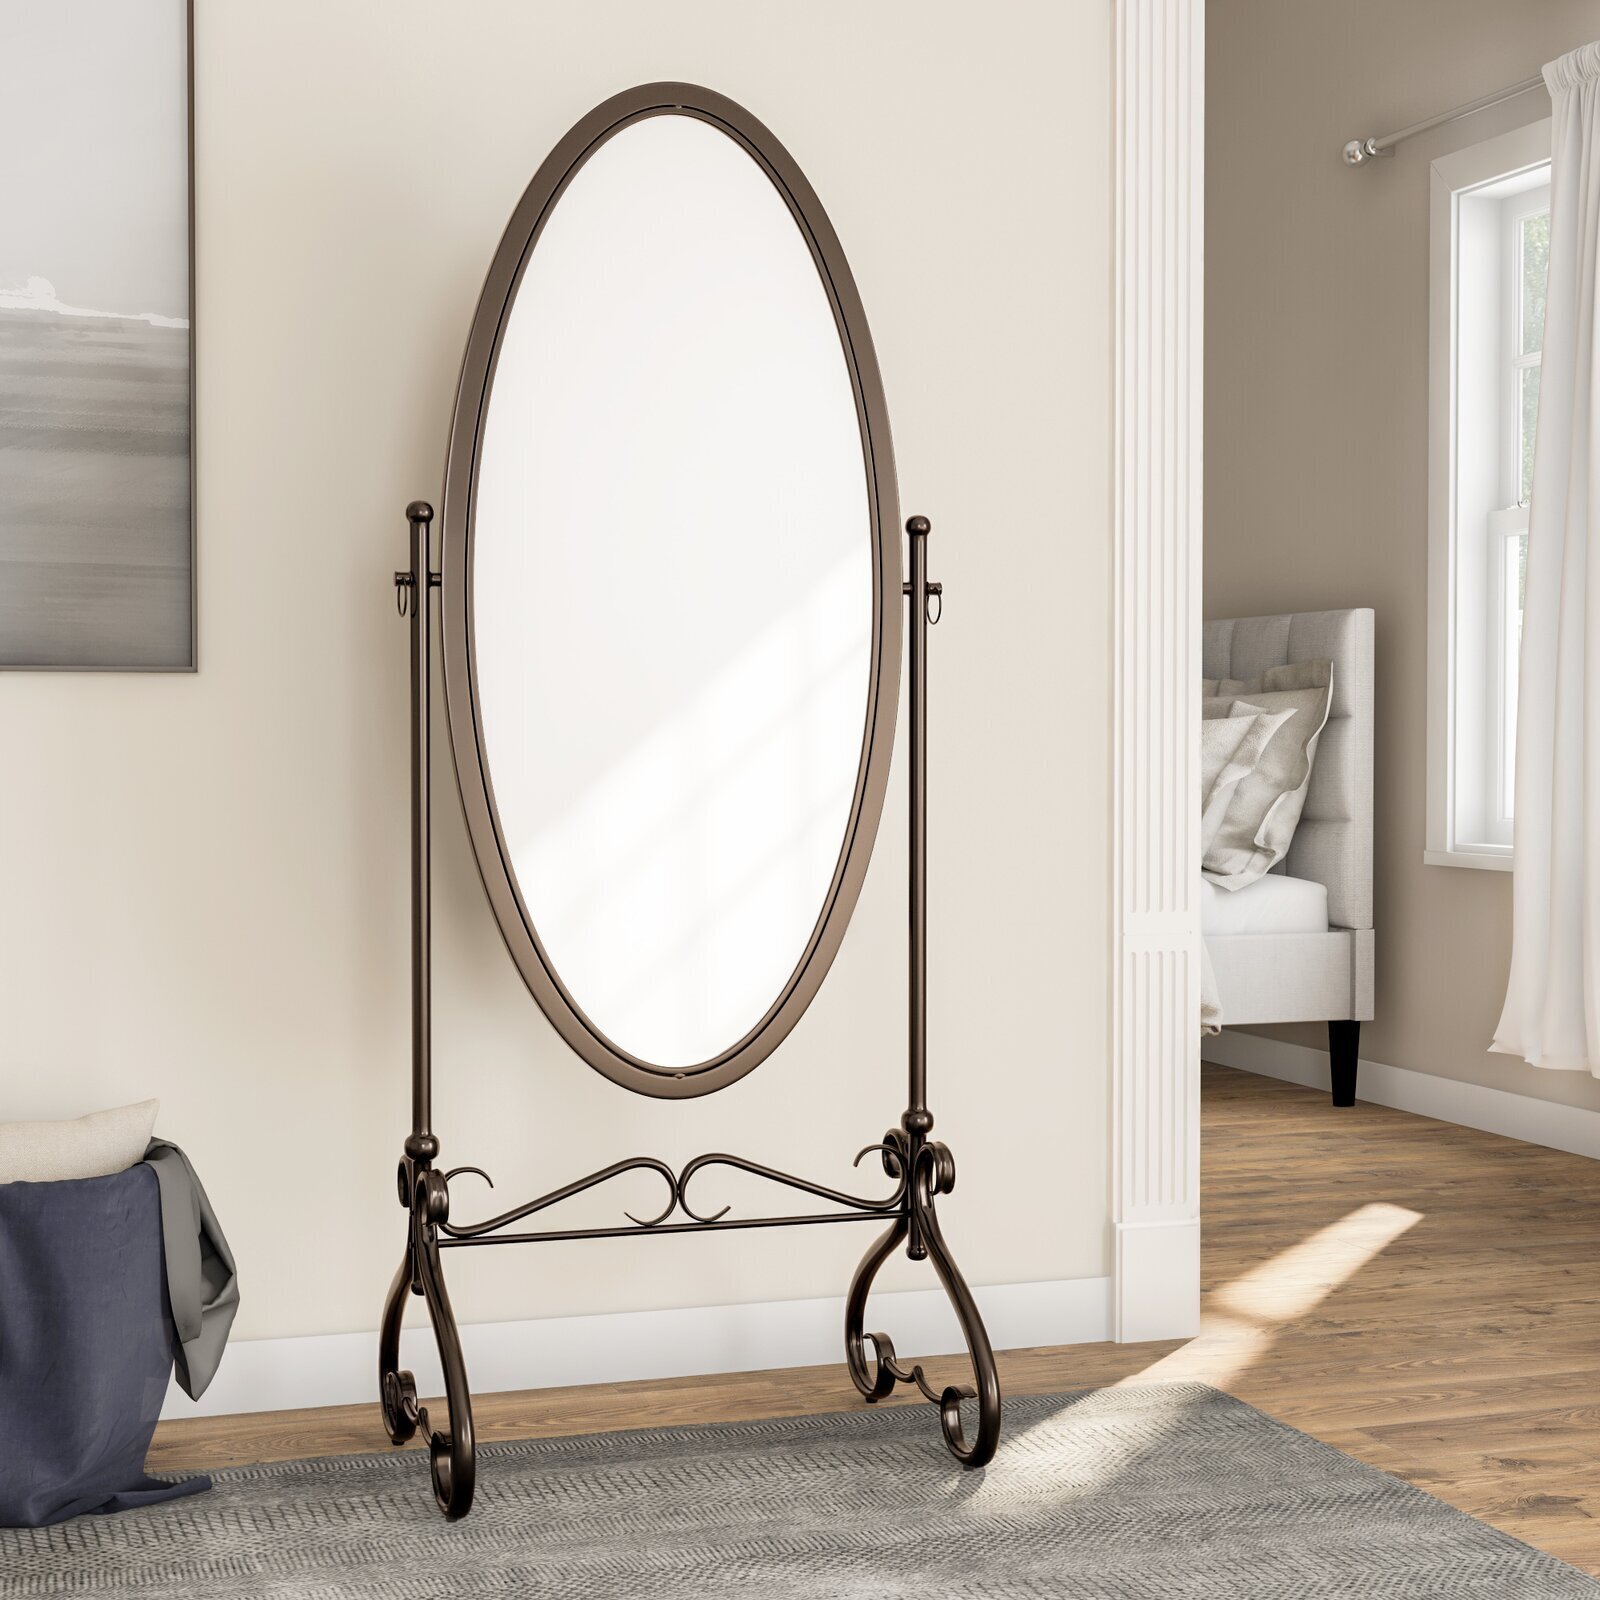 Cheval style Antique Full length Mirror